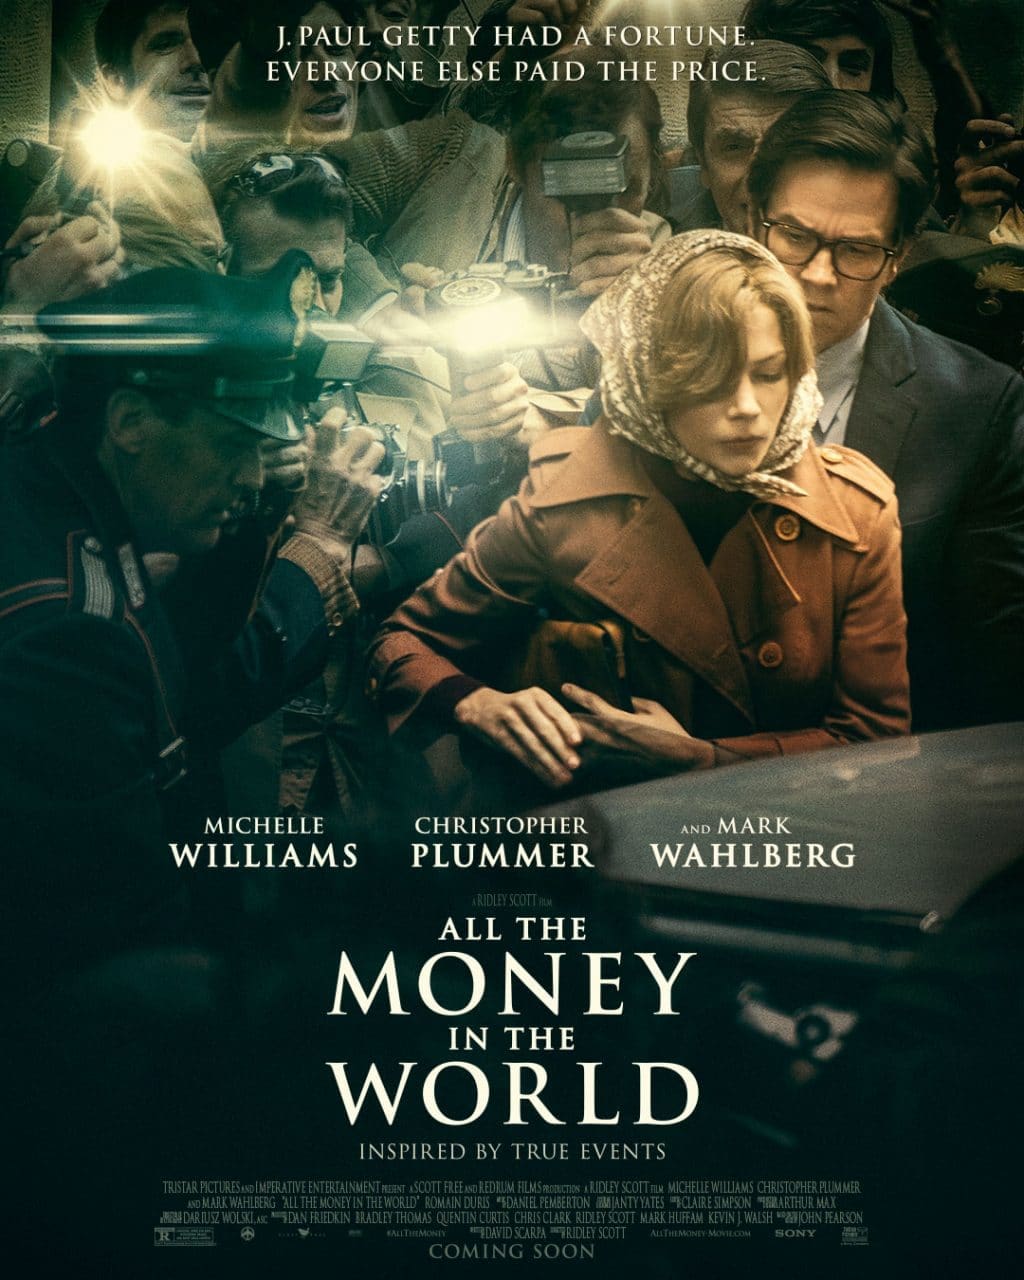 Movie poster - all the money in the world - arts mr